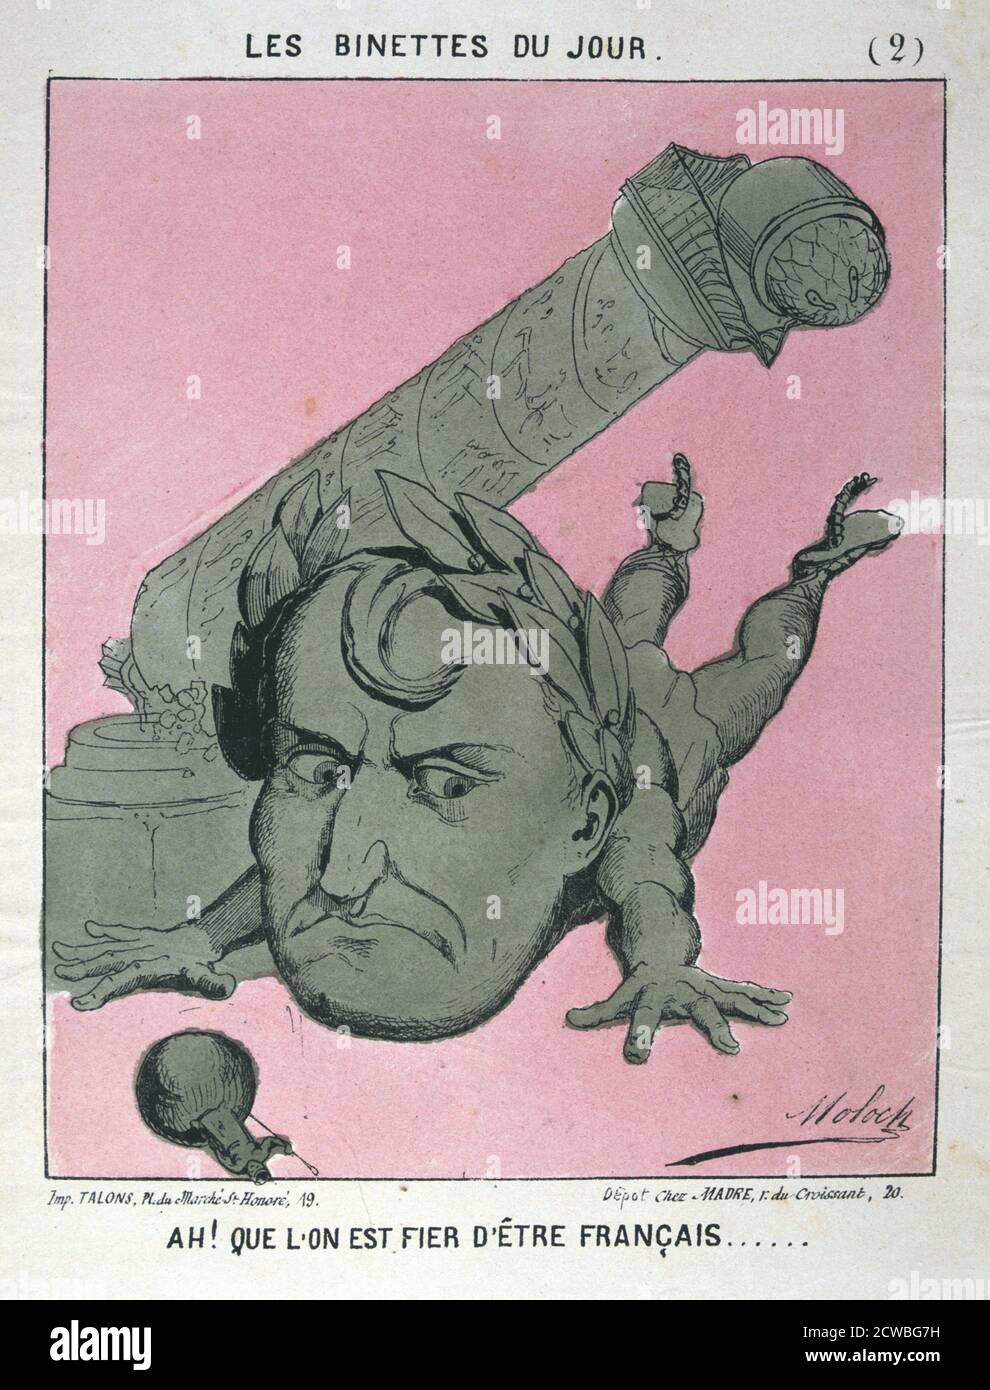 Ah! Que l'on est fier d'etre Francais', 1871. Doesn't it make one proud to be French?, laments a caricature of Napoleon I, whose statue was toppled from its column in the Place de la Vendome by the Paris Communards on 8 May 1871. From a private collection. Stock Photo